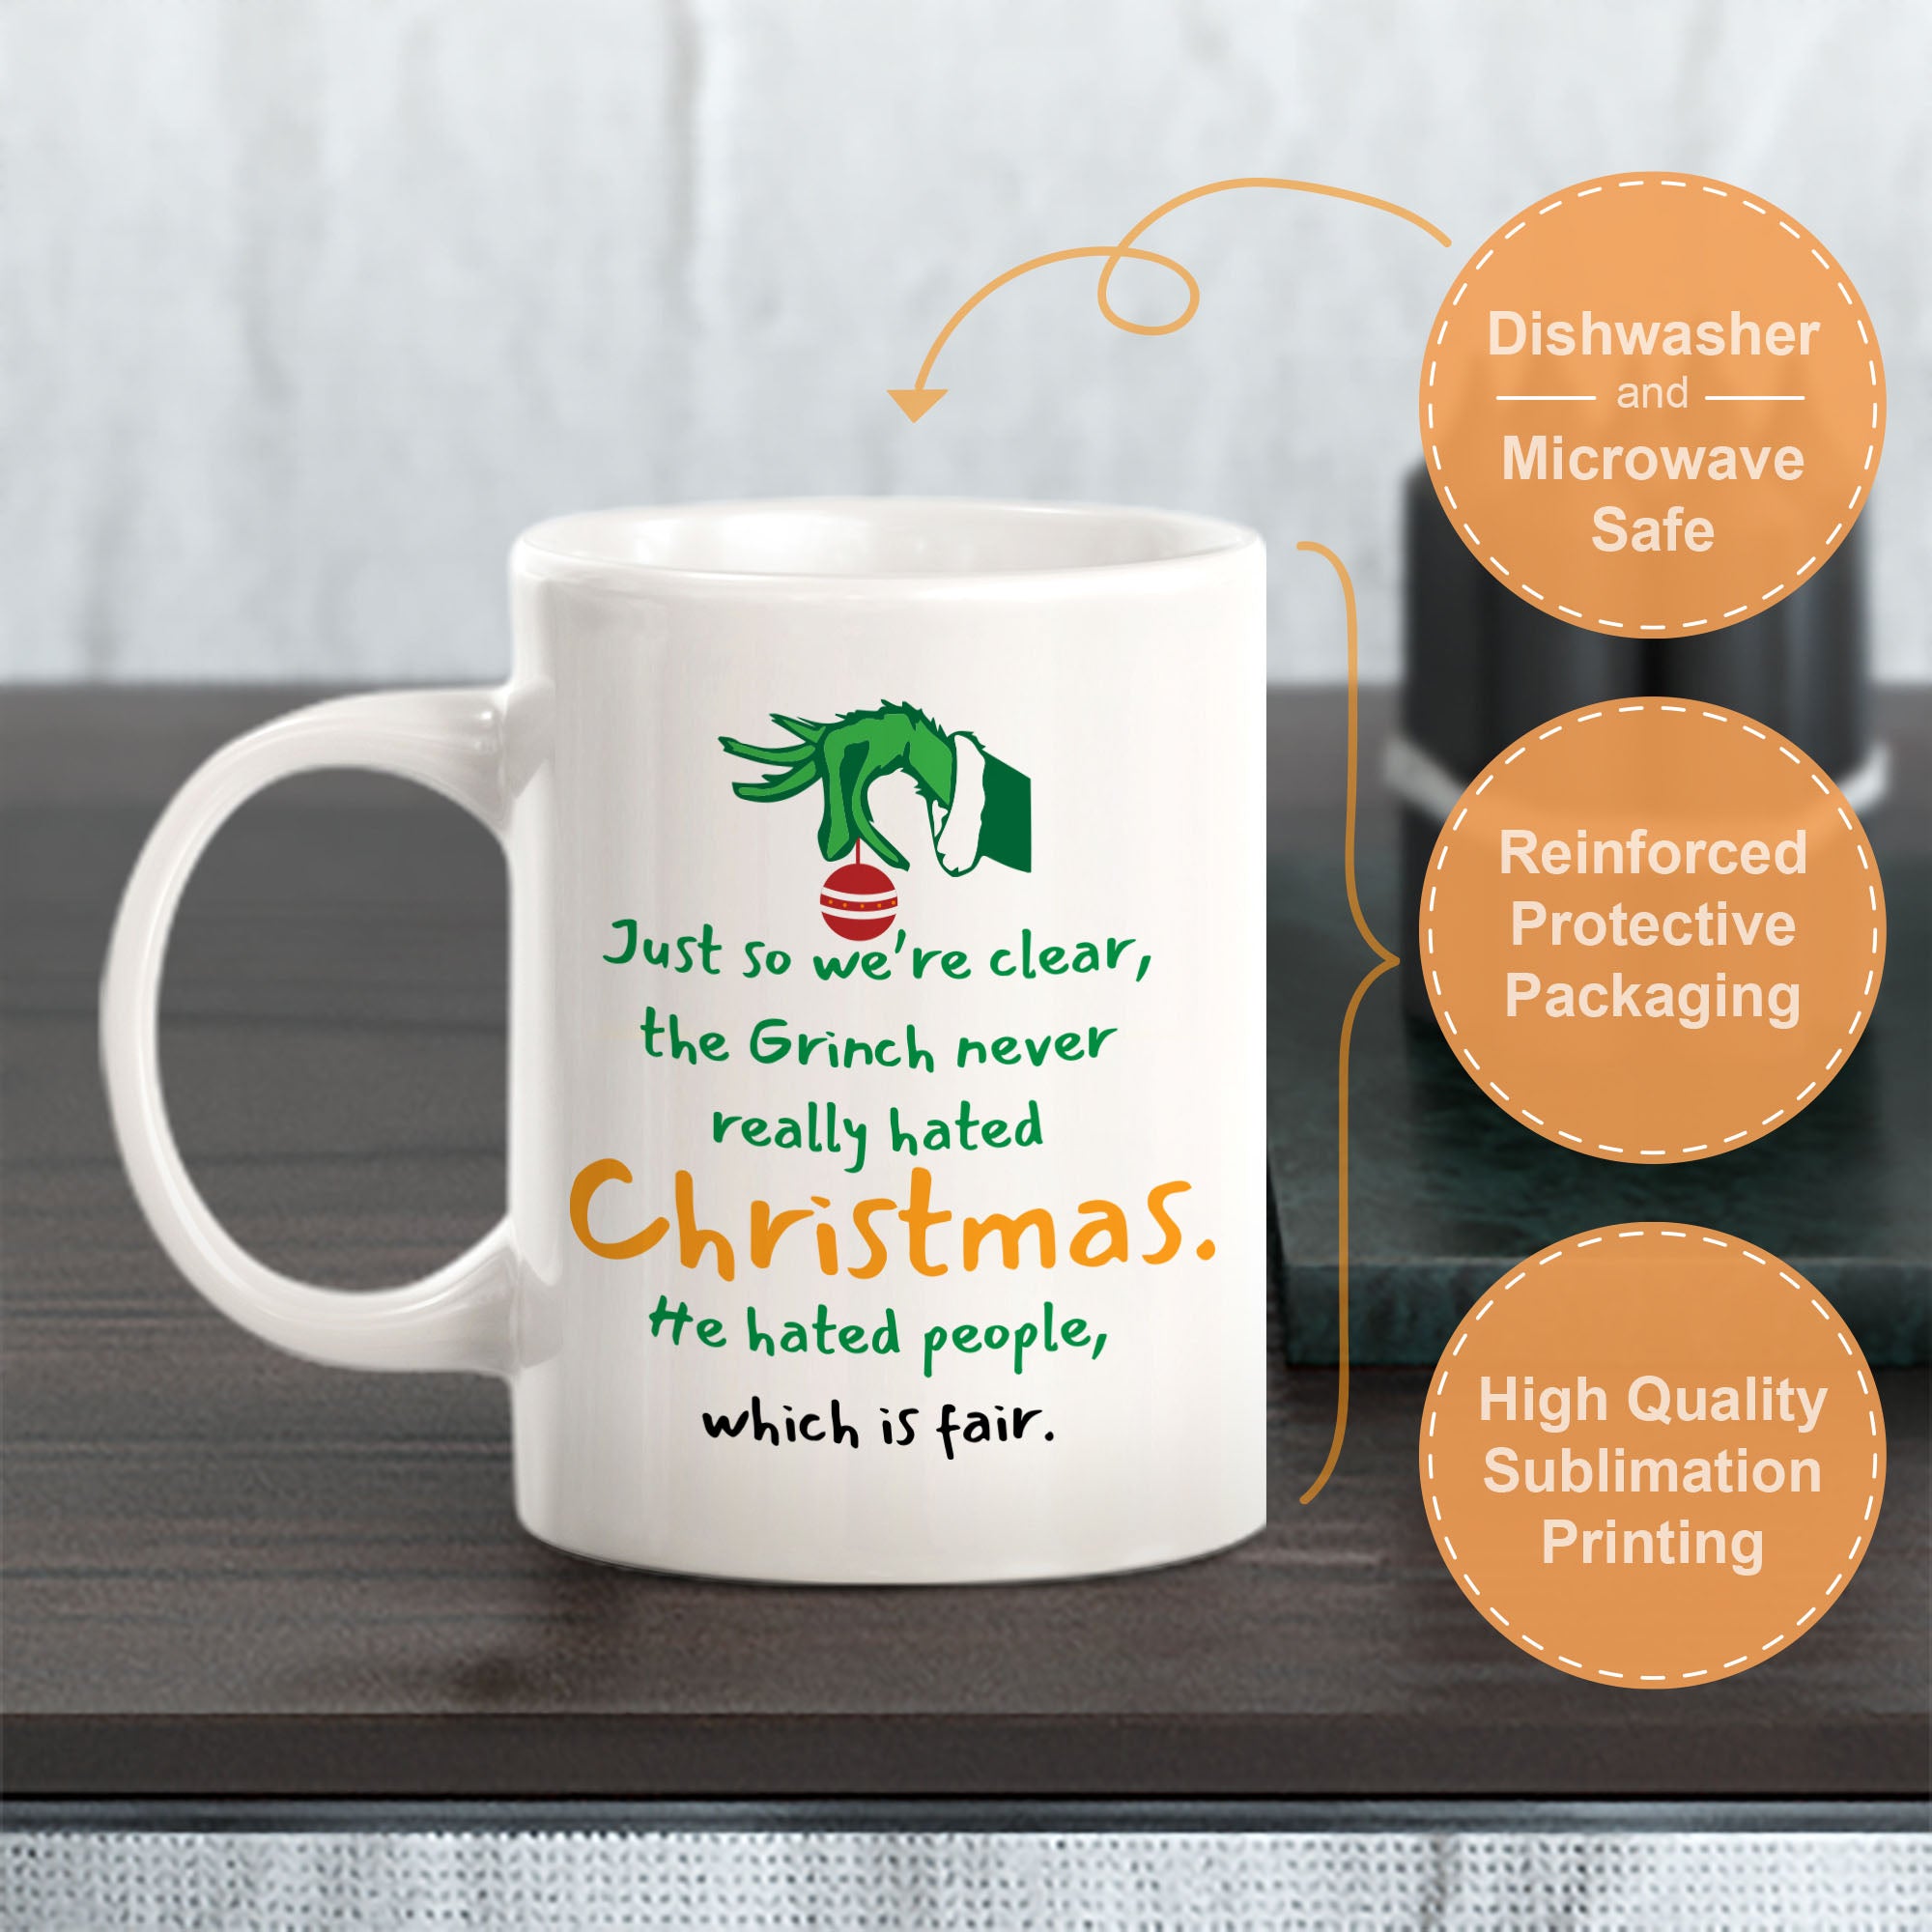 Just So We’re Clear, The Grinch Never Really Hated Christmas. He Hated People, Which Is Fair. Christmas Coffee Mug